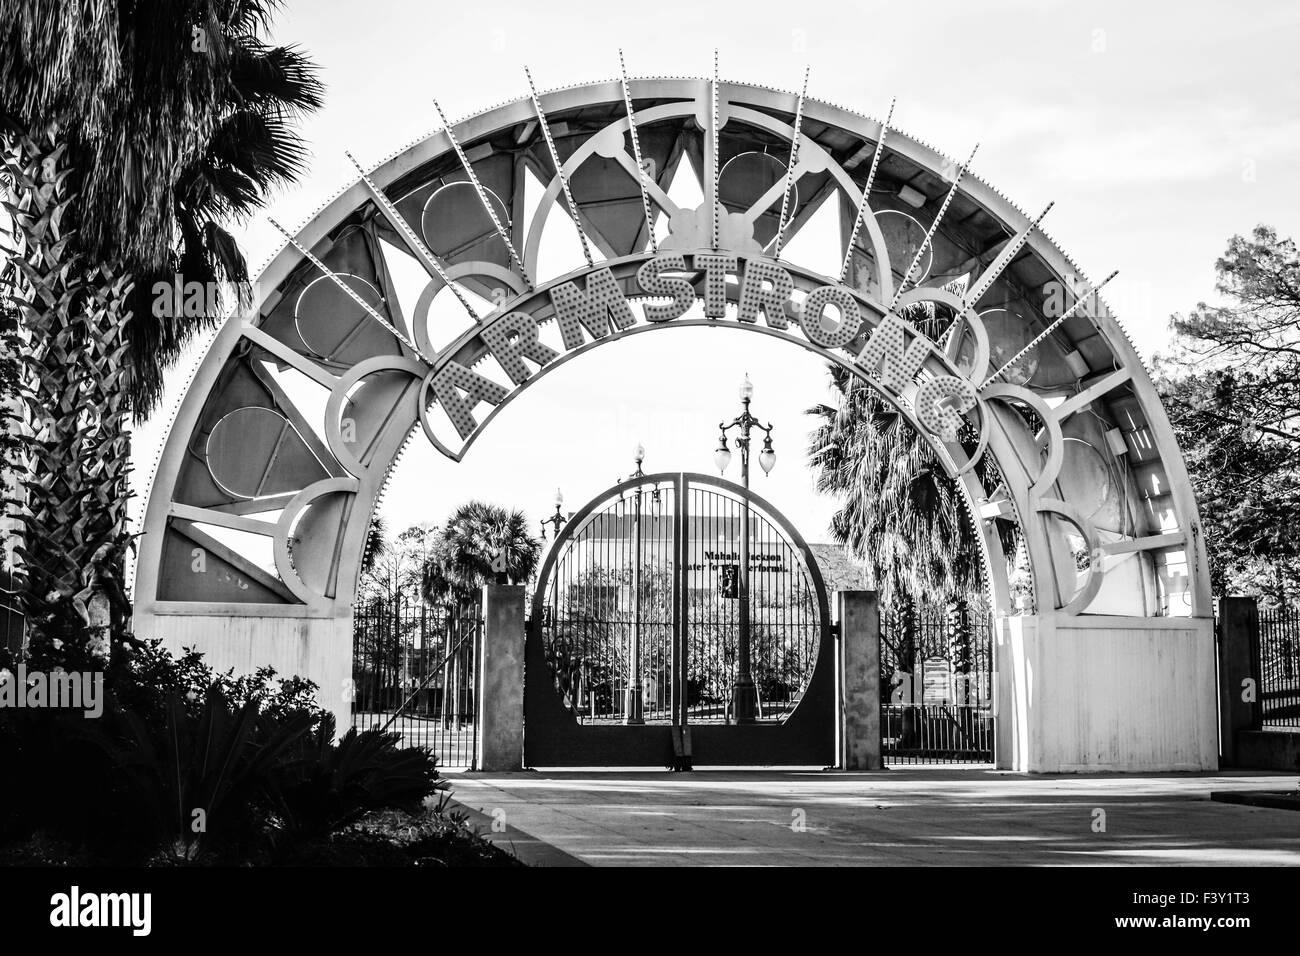 The circular iron gate and Metal archway entrance to the impressive Louis Armstrong Park in the Treme area of New Orleans, LA, USA Stock Photo